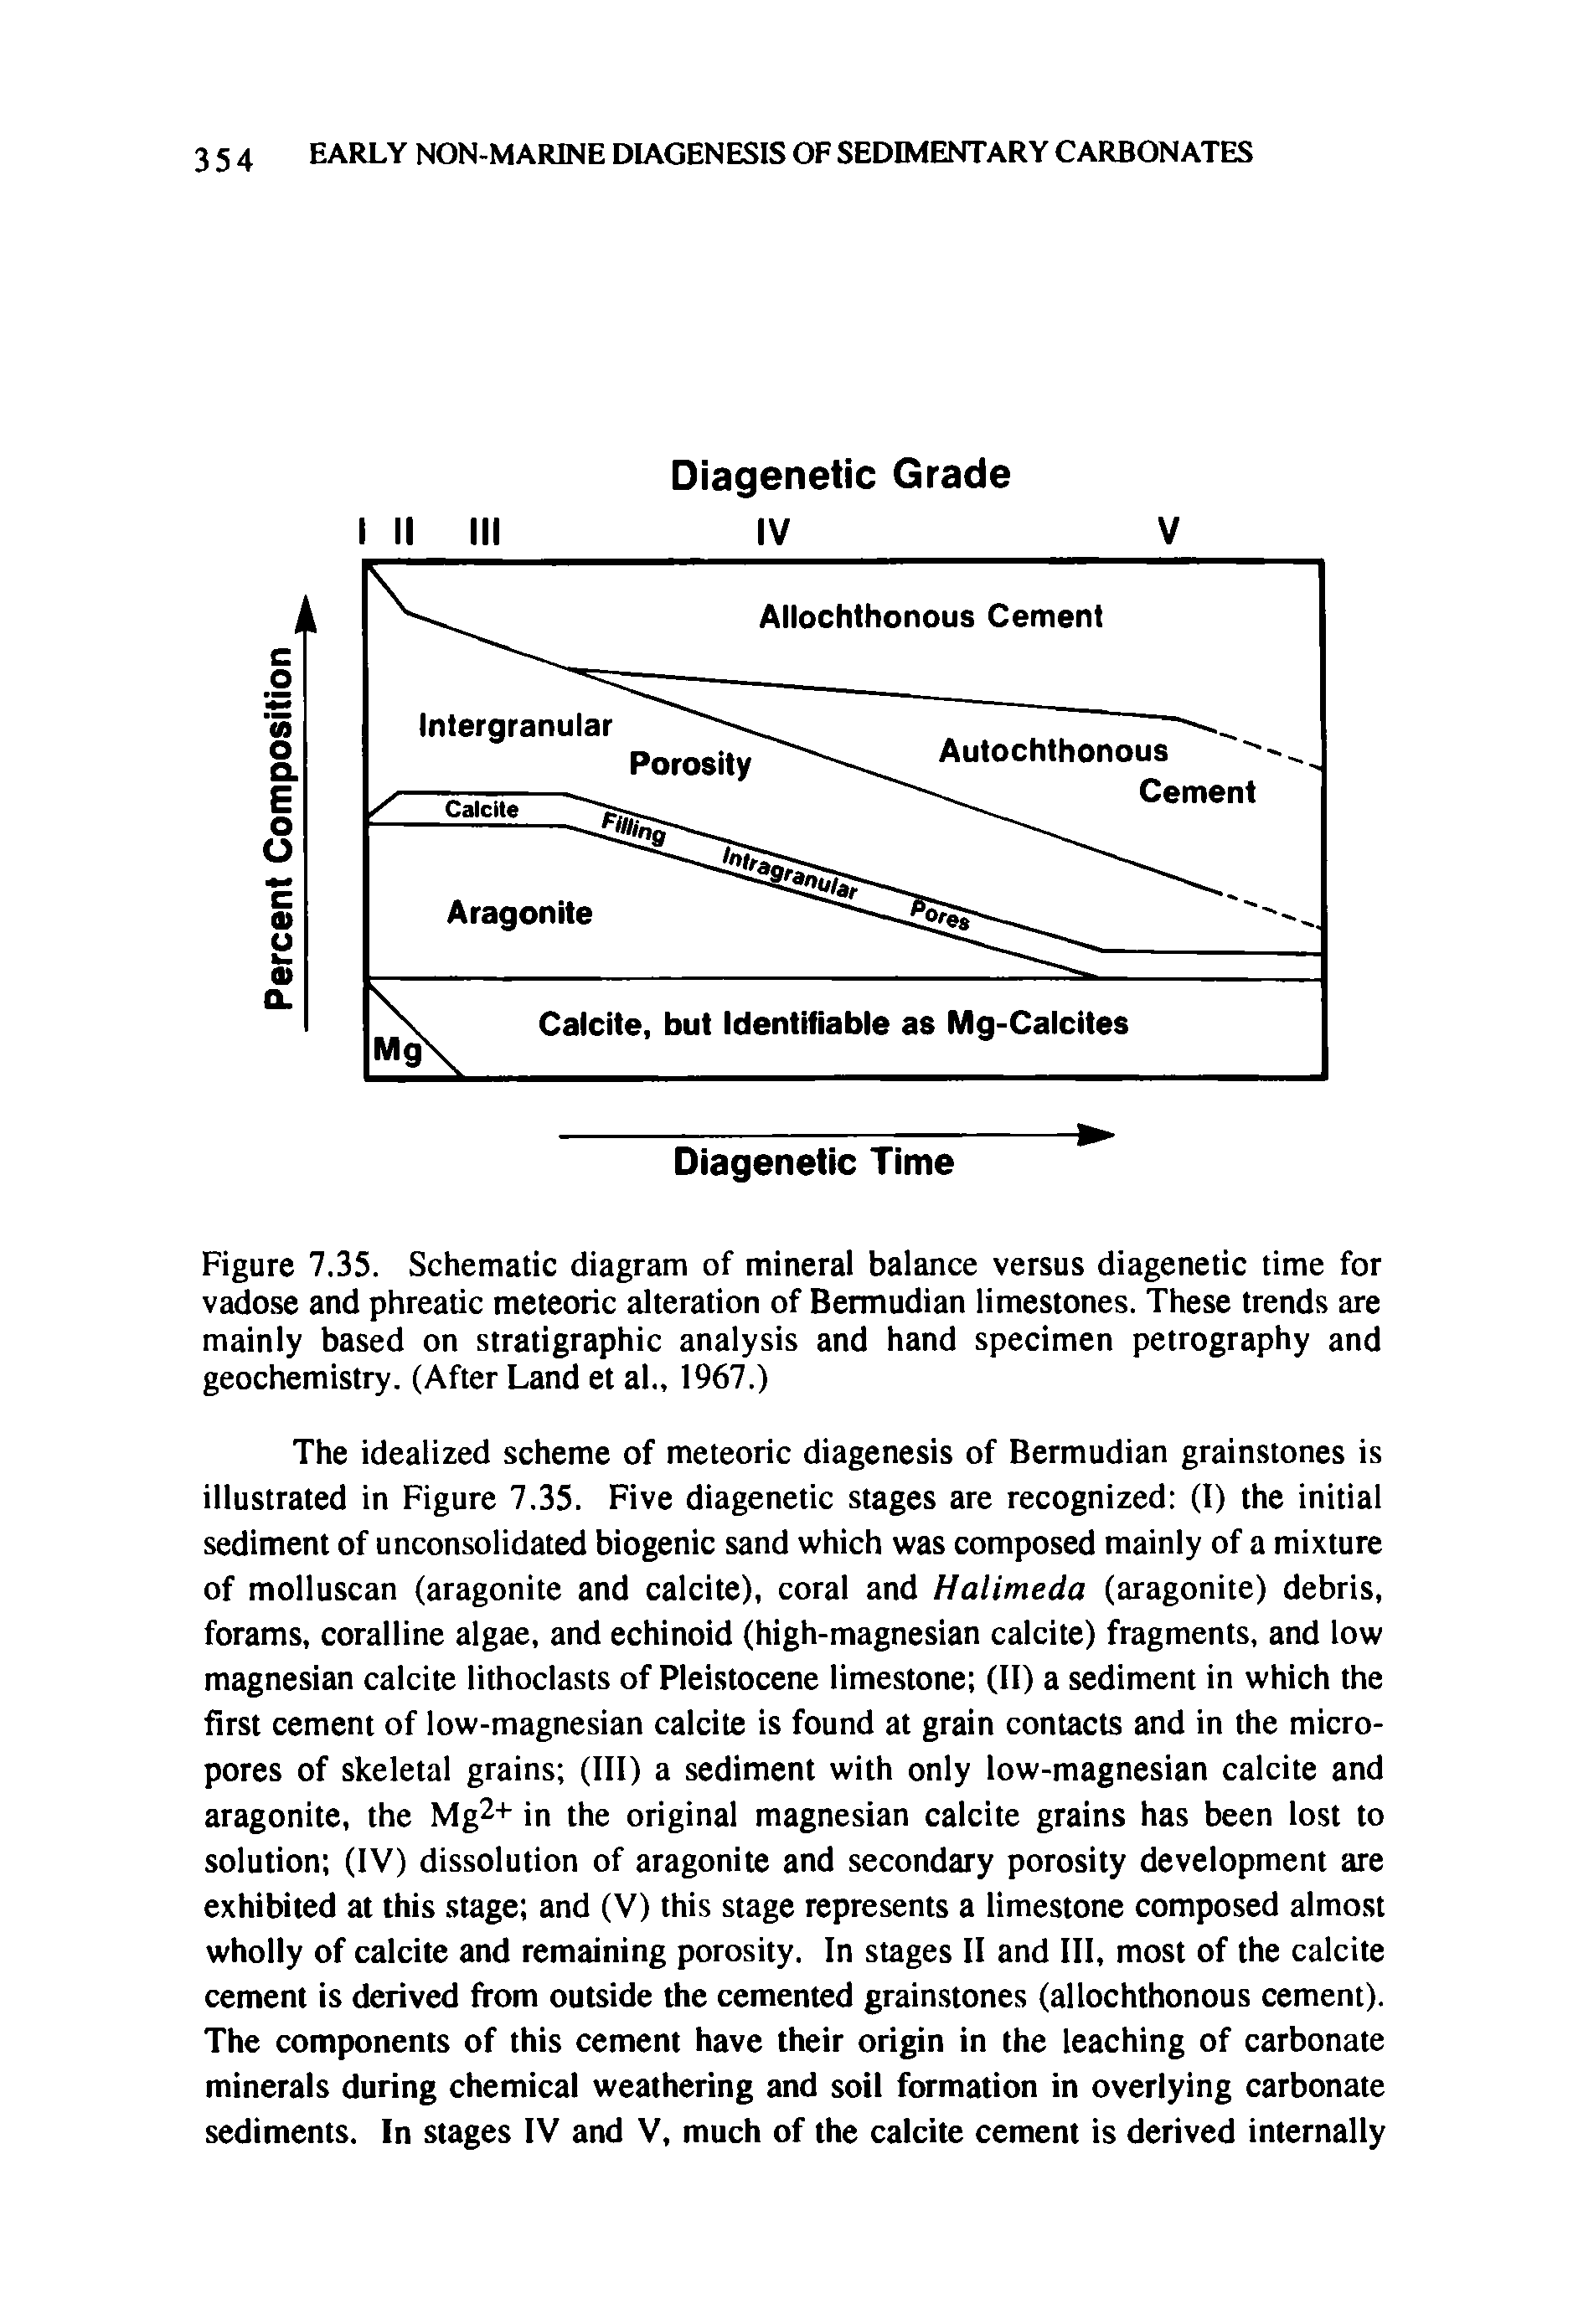 Figure 7.35. Schematic diagram of mineral balance versus diagenetic time for vadose and phreatic meteoric alteration of Bermudian limestones. These trends are mainly based on stratigraphic analysis and hand specimen petrography and geochemistry. (After Land et al., 1967.)...